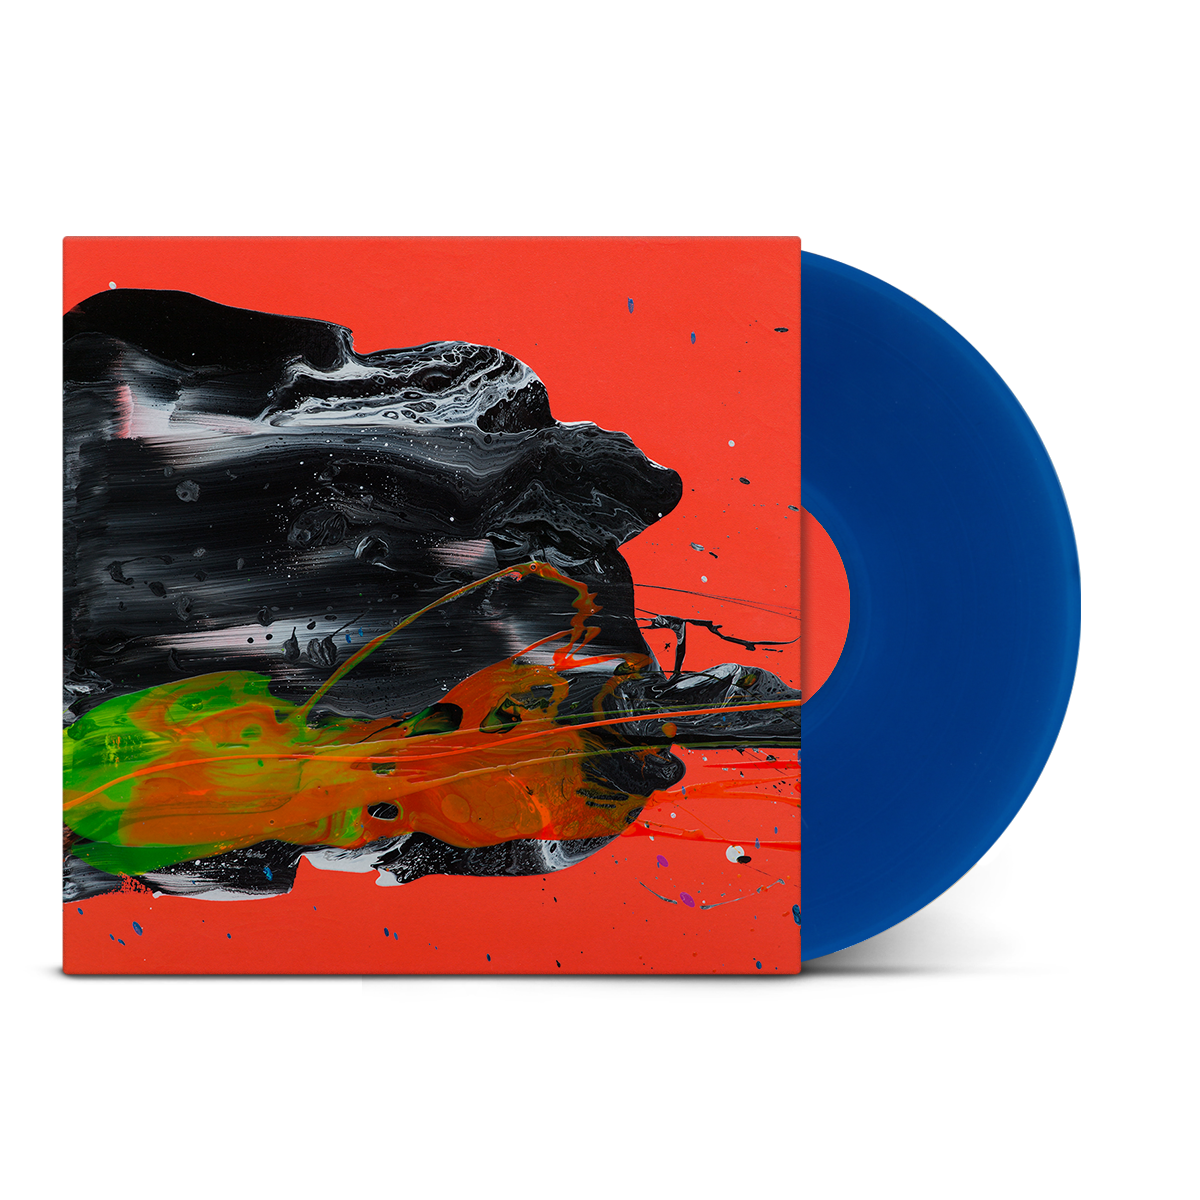 Undecided - Vinyl (Blue) – goose the band